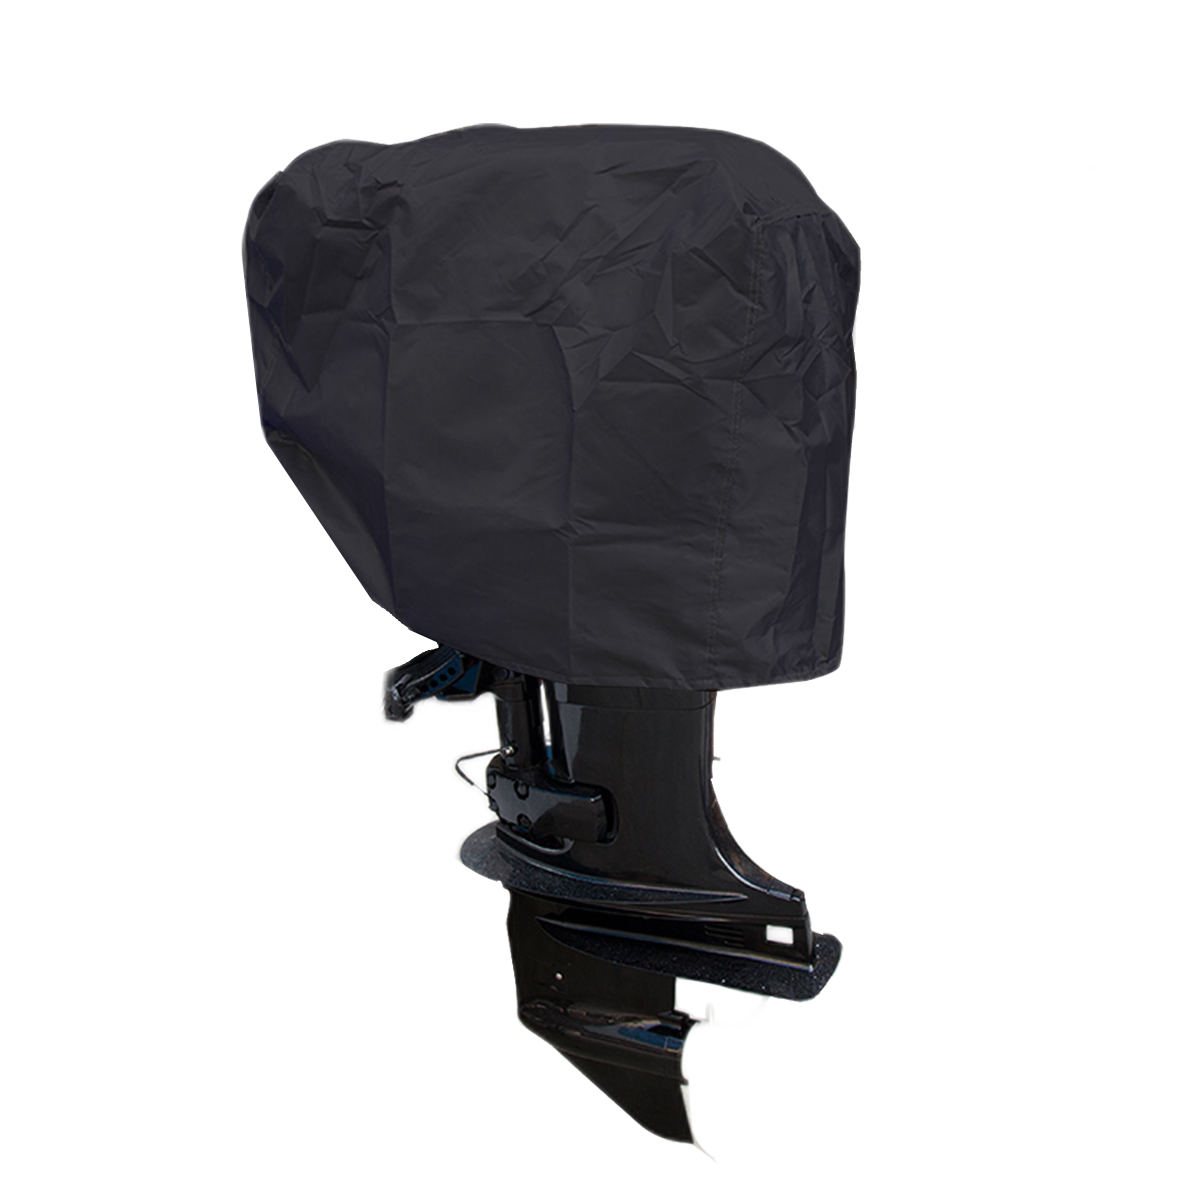 210D Oxford Boat Full Outboard Motor Engine Cover 15HP/15-30HP/30-60HP/60-100HP/100-150HP/175-250HP 